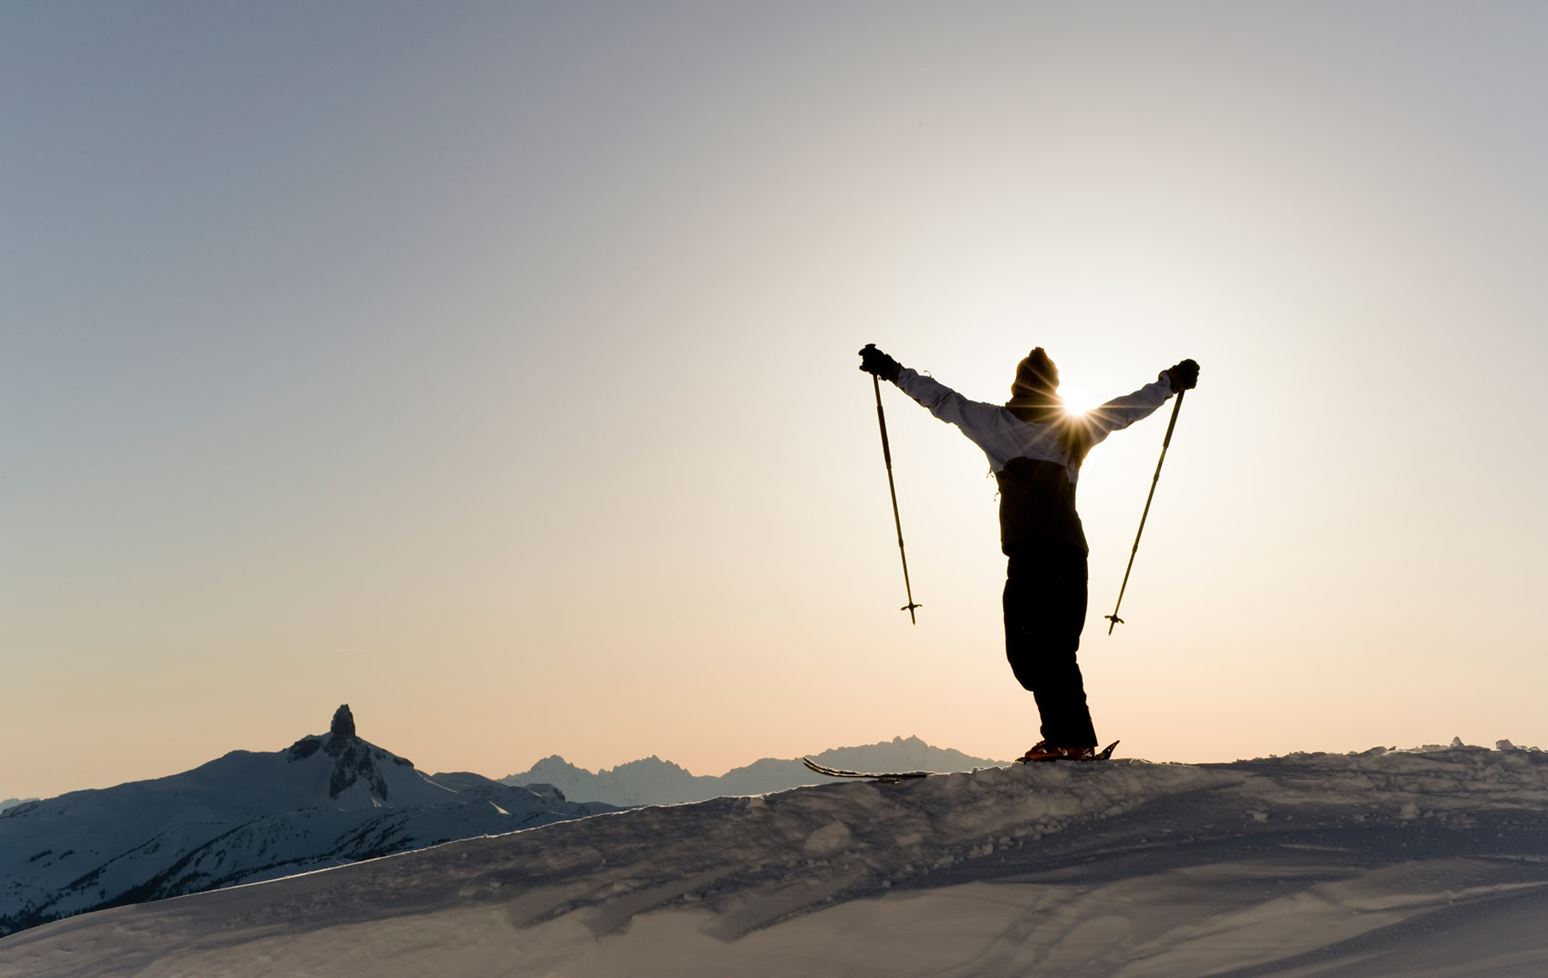 From skiing to saving lives, analytics is changing business and decision-making